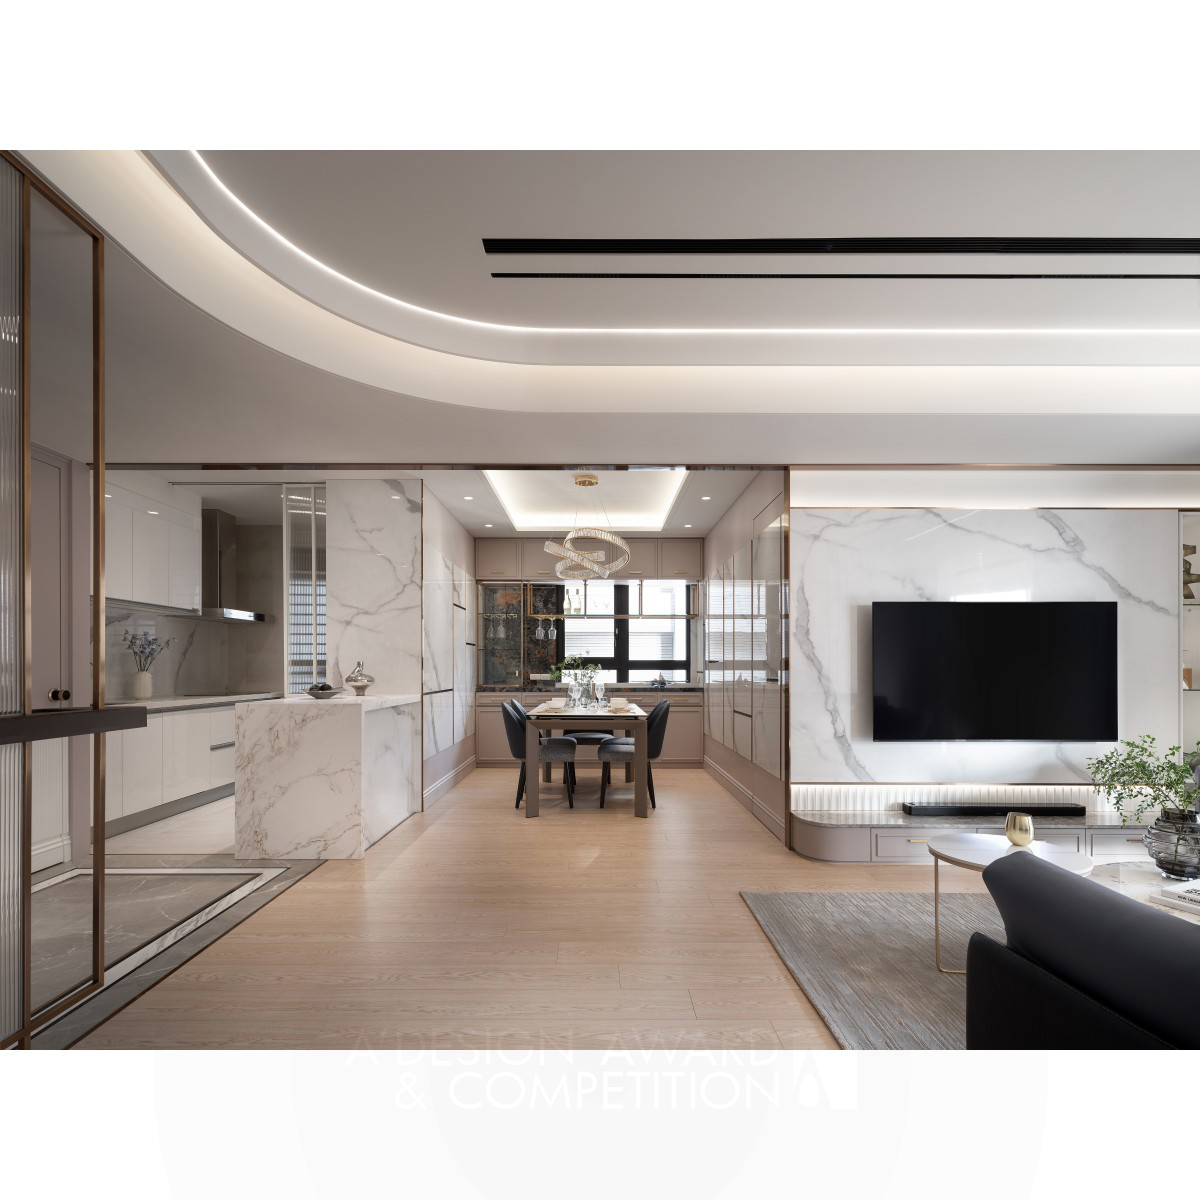 Yun Chien,Tsai wins Bronze at the prestigious A' Interior Space, Retail and Exhibition Design Award with Airy Elegance Residential.